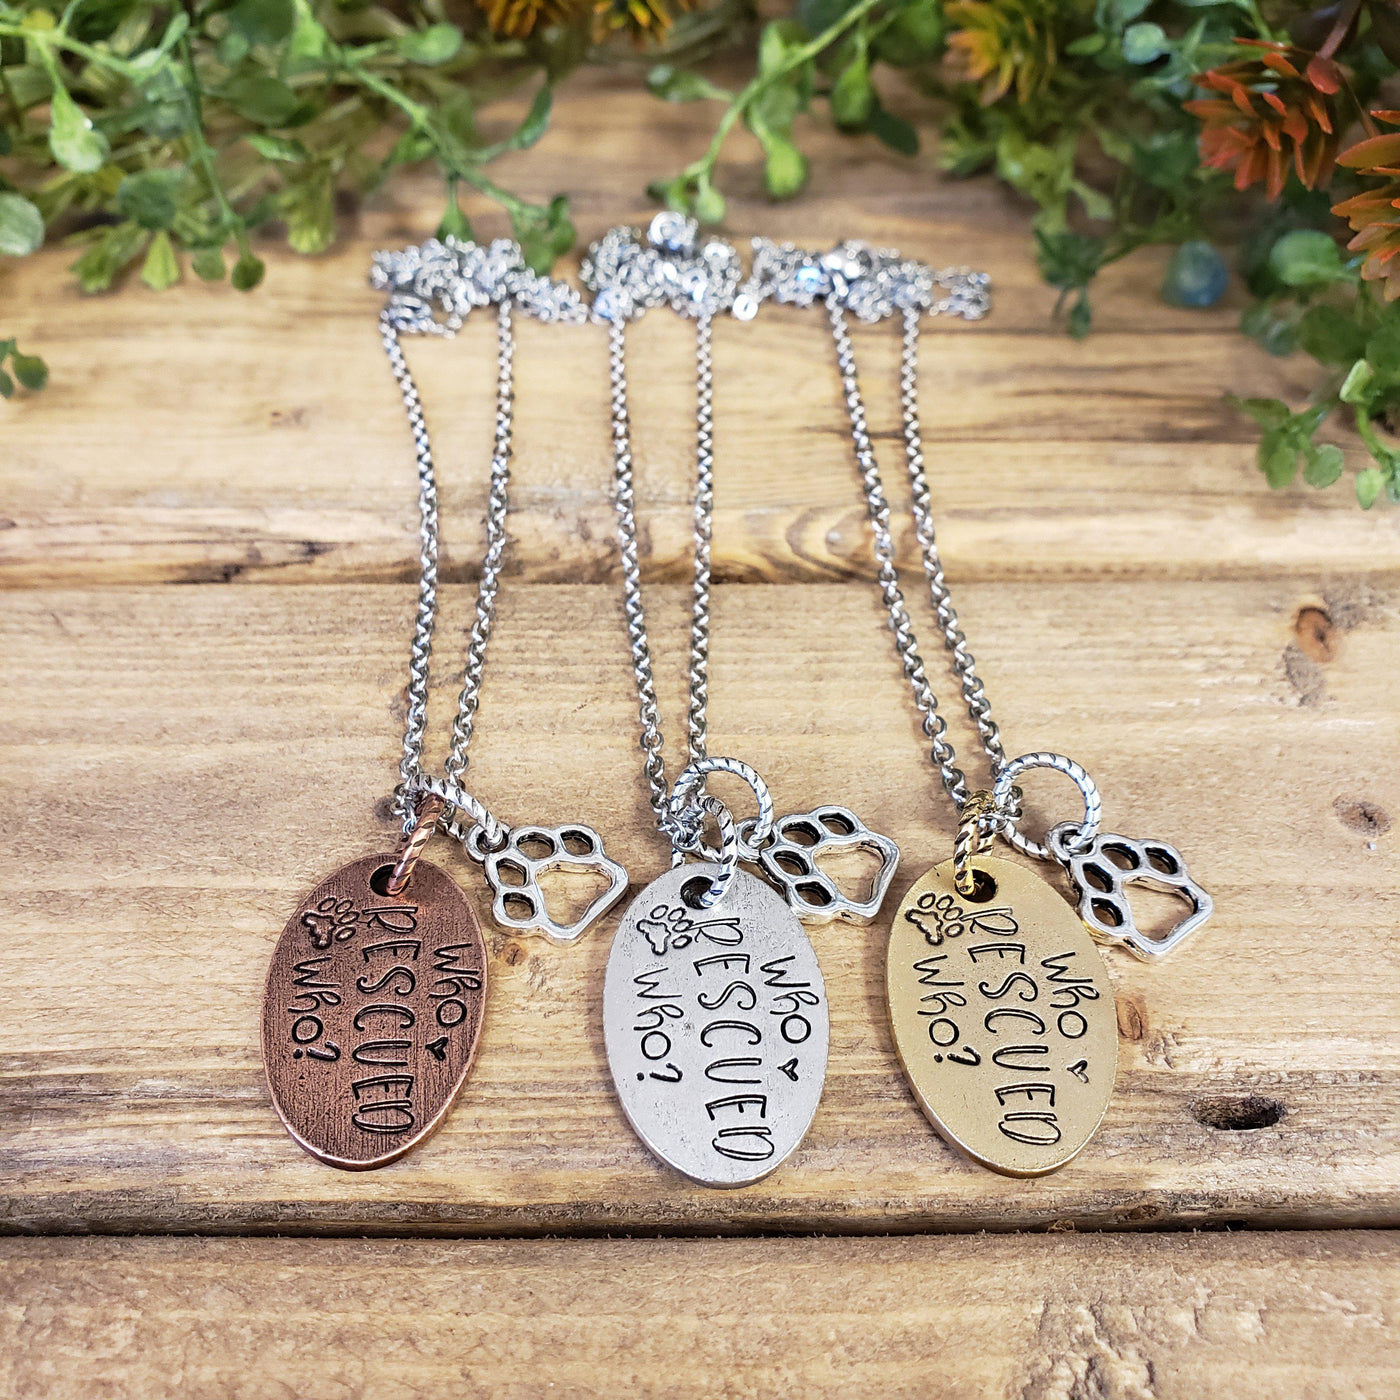 Who Rescued Who - Little Blue Bus Jewelry